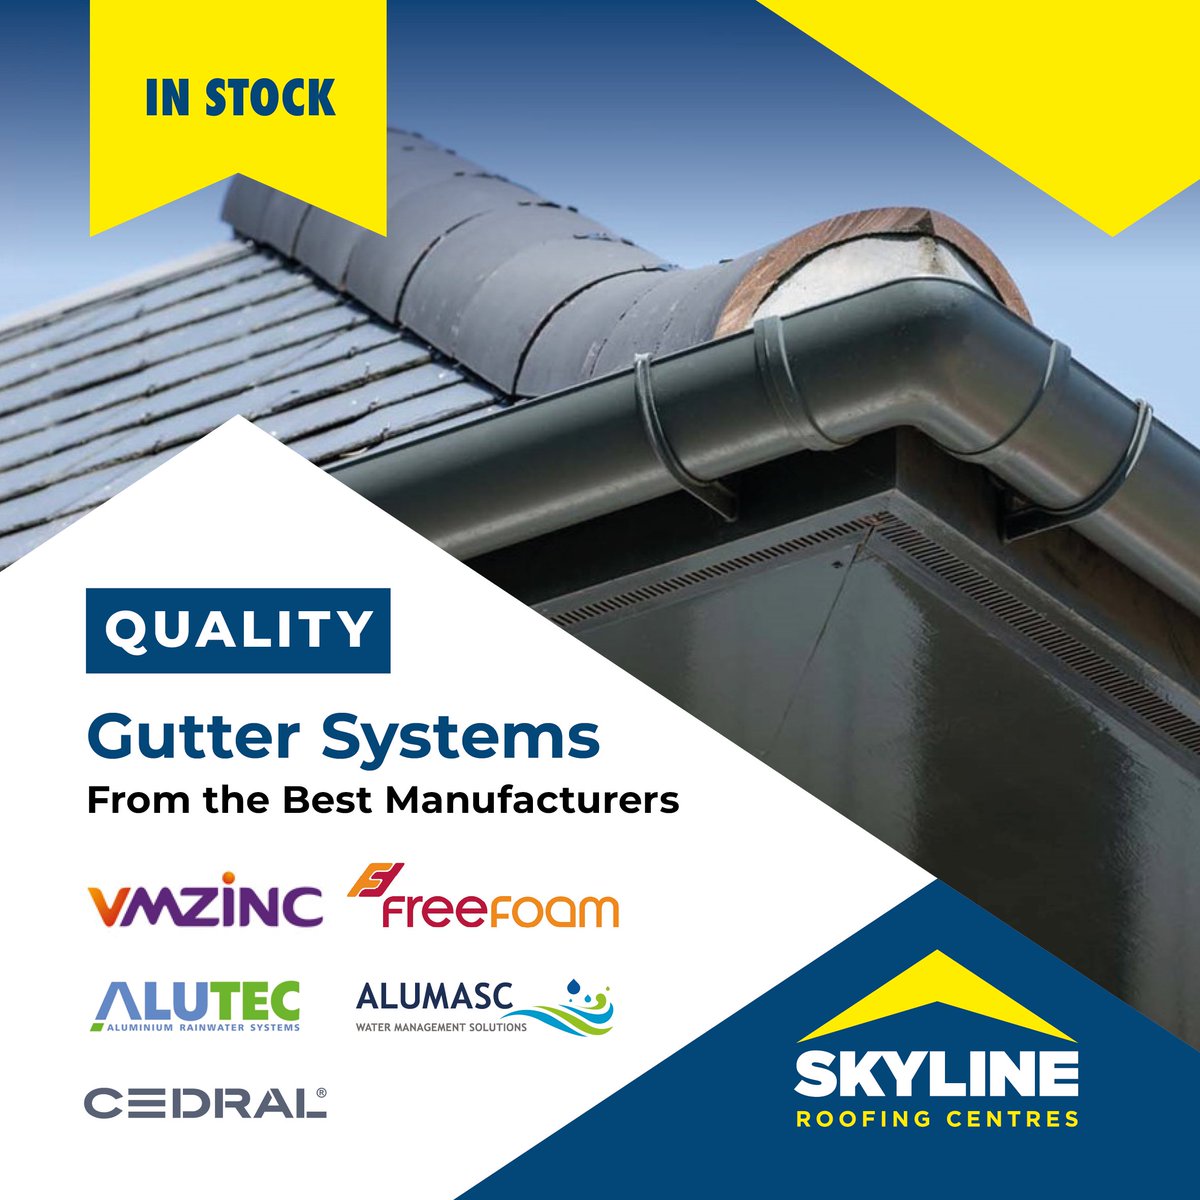 You can trust Skyline to provide reliable & professional gutter solutions for your project. Choose from sleek and stylish designs, to heavy-duty options for commercial and industrial buildings.

#gutters #rainwatersystems #roofingsupplies #skylineroofing #loftconversion #builder